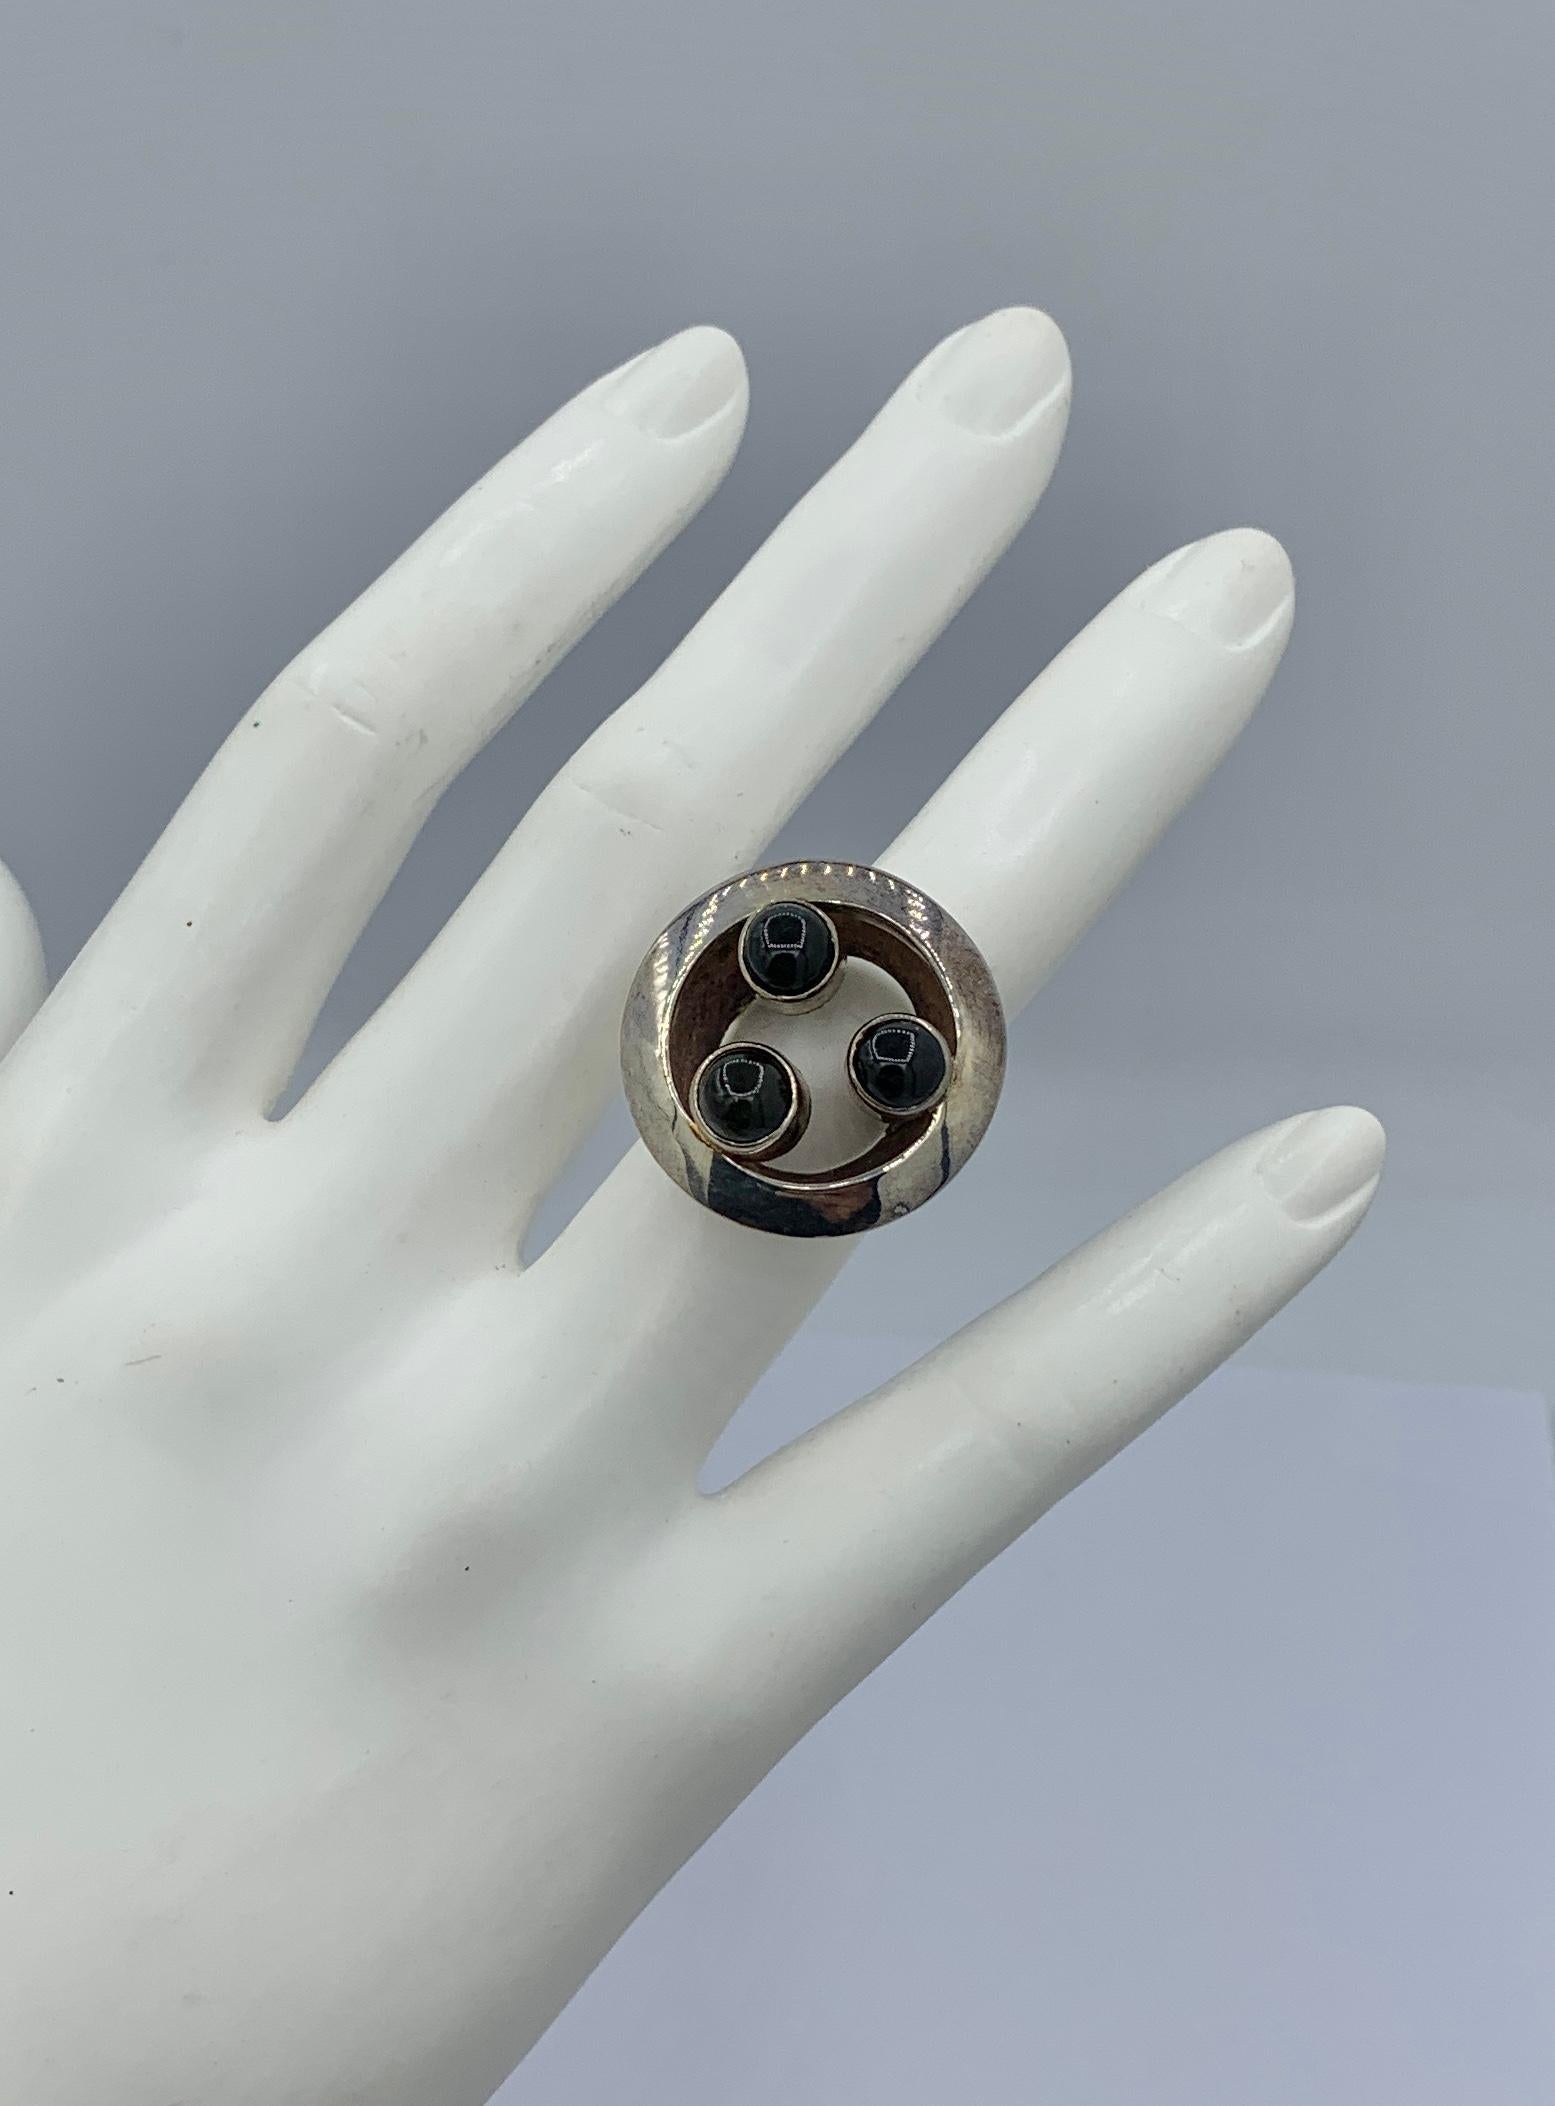 This is a magnificent signed BURLE MARX Black Tourmaline Sterling Silver Modernist Ring by the esteemed and highly collectible artist jeweler and dating to the Mid-Century Modern period in its original black box.
The magnificent jewel features a